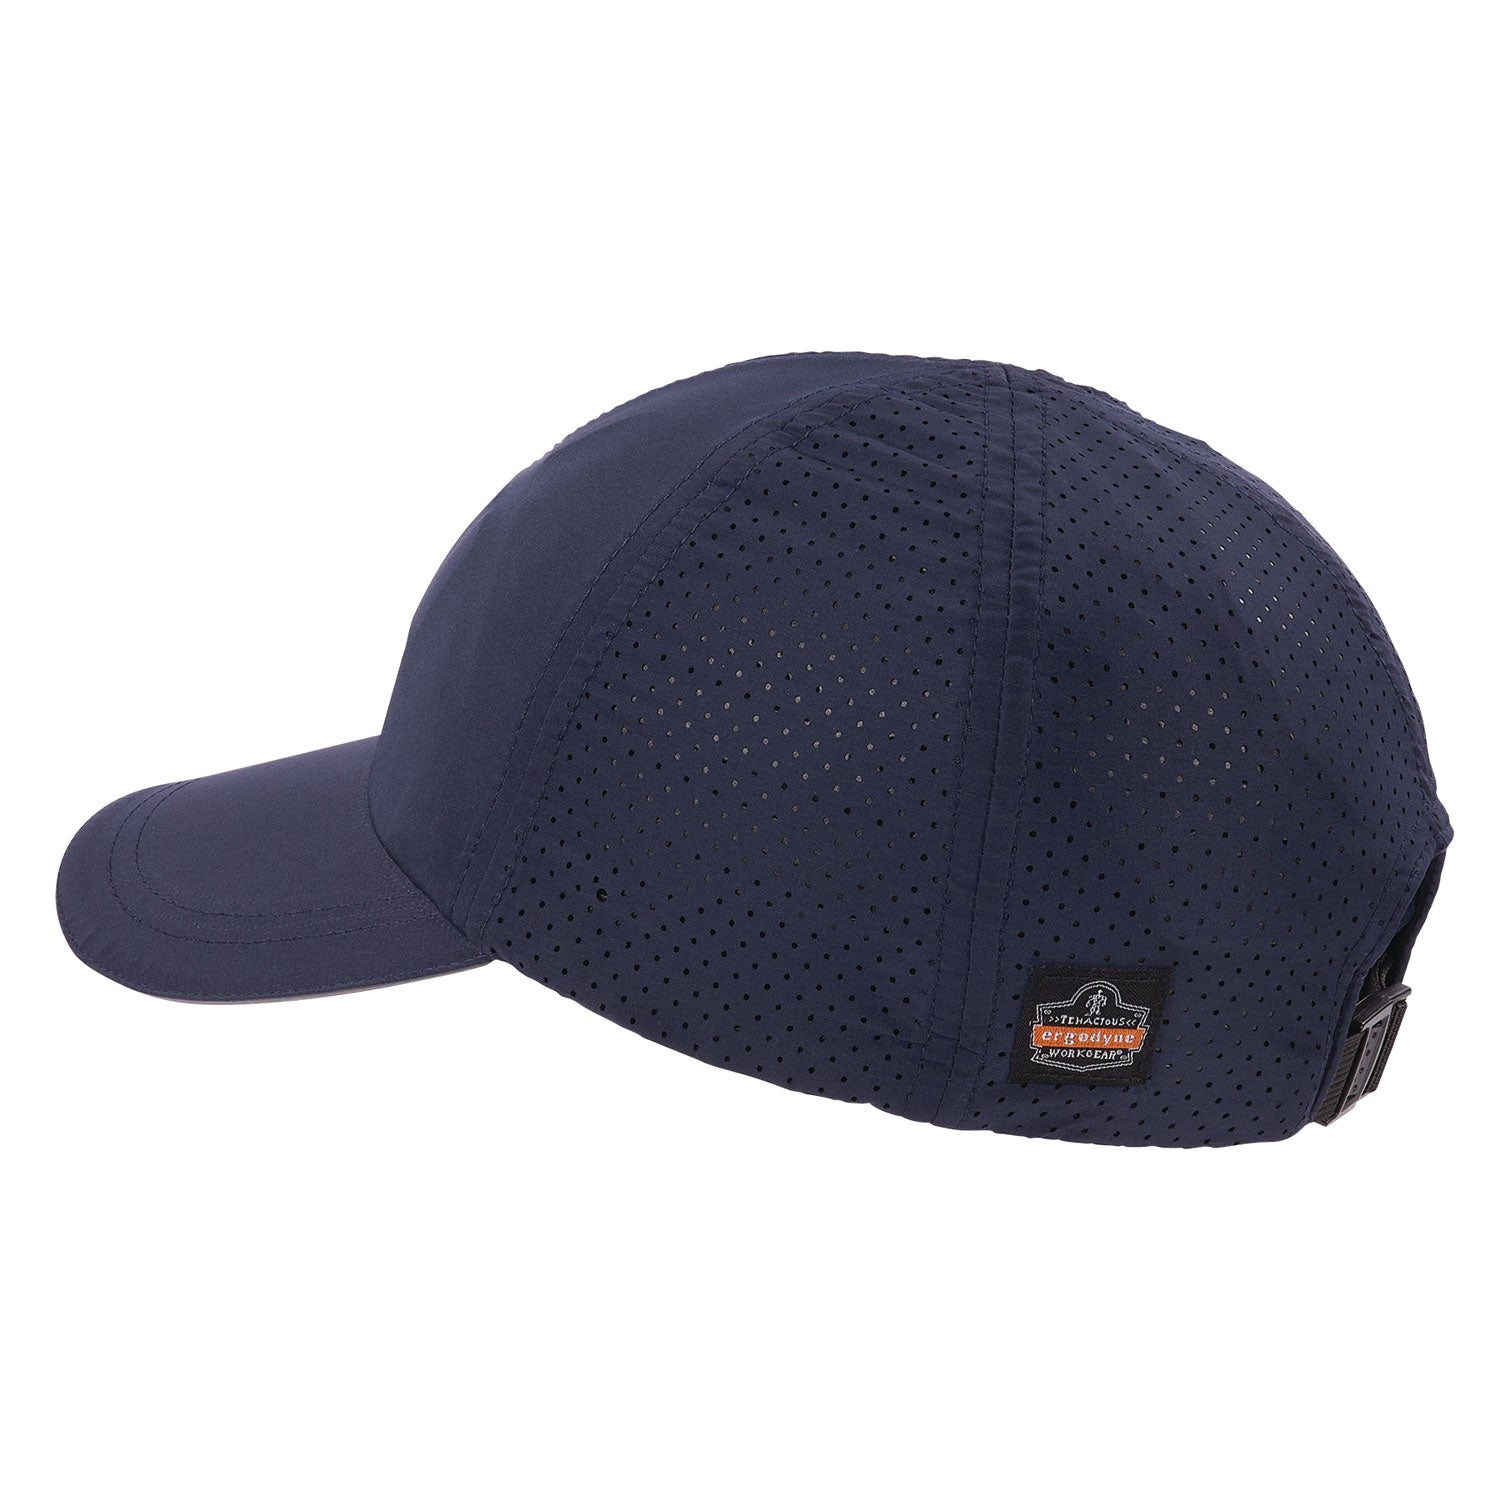 skullerz-8947-lightweight-baseball-hat-and-bump-cap-insert-x-small-small-navy-ships-in-1-3-business-days_ego23453 - 2